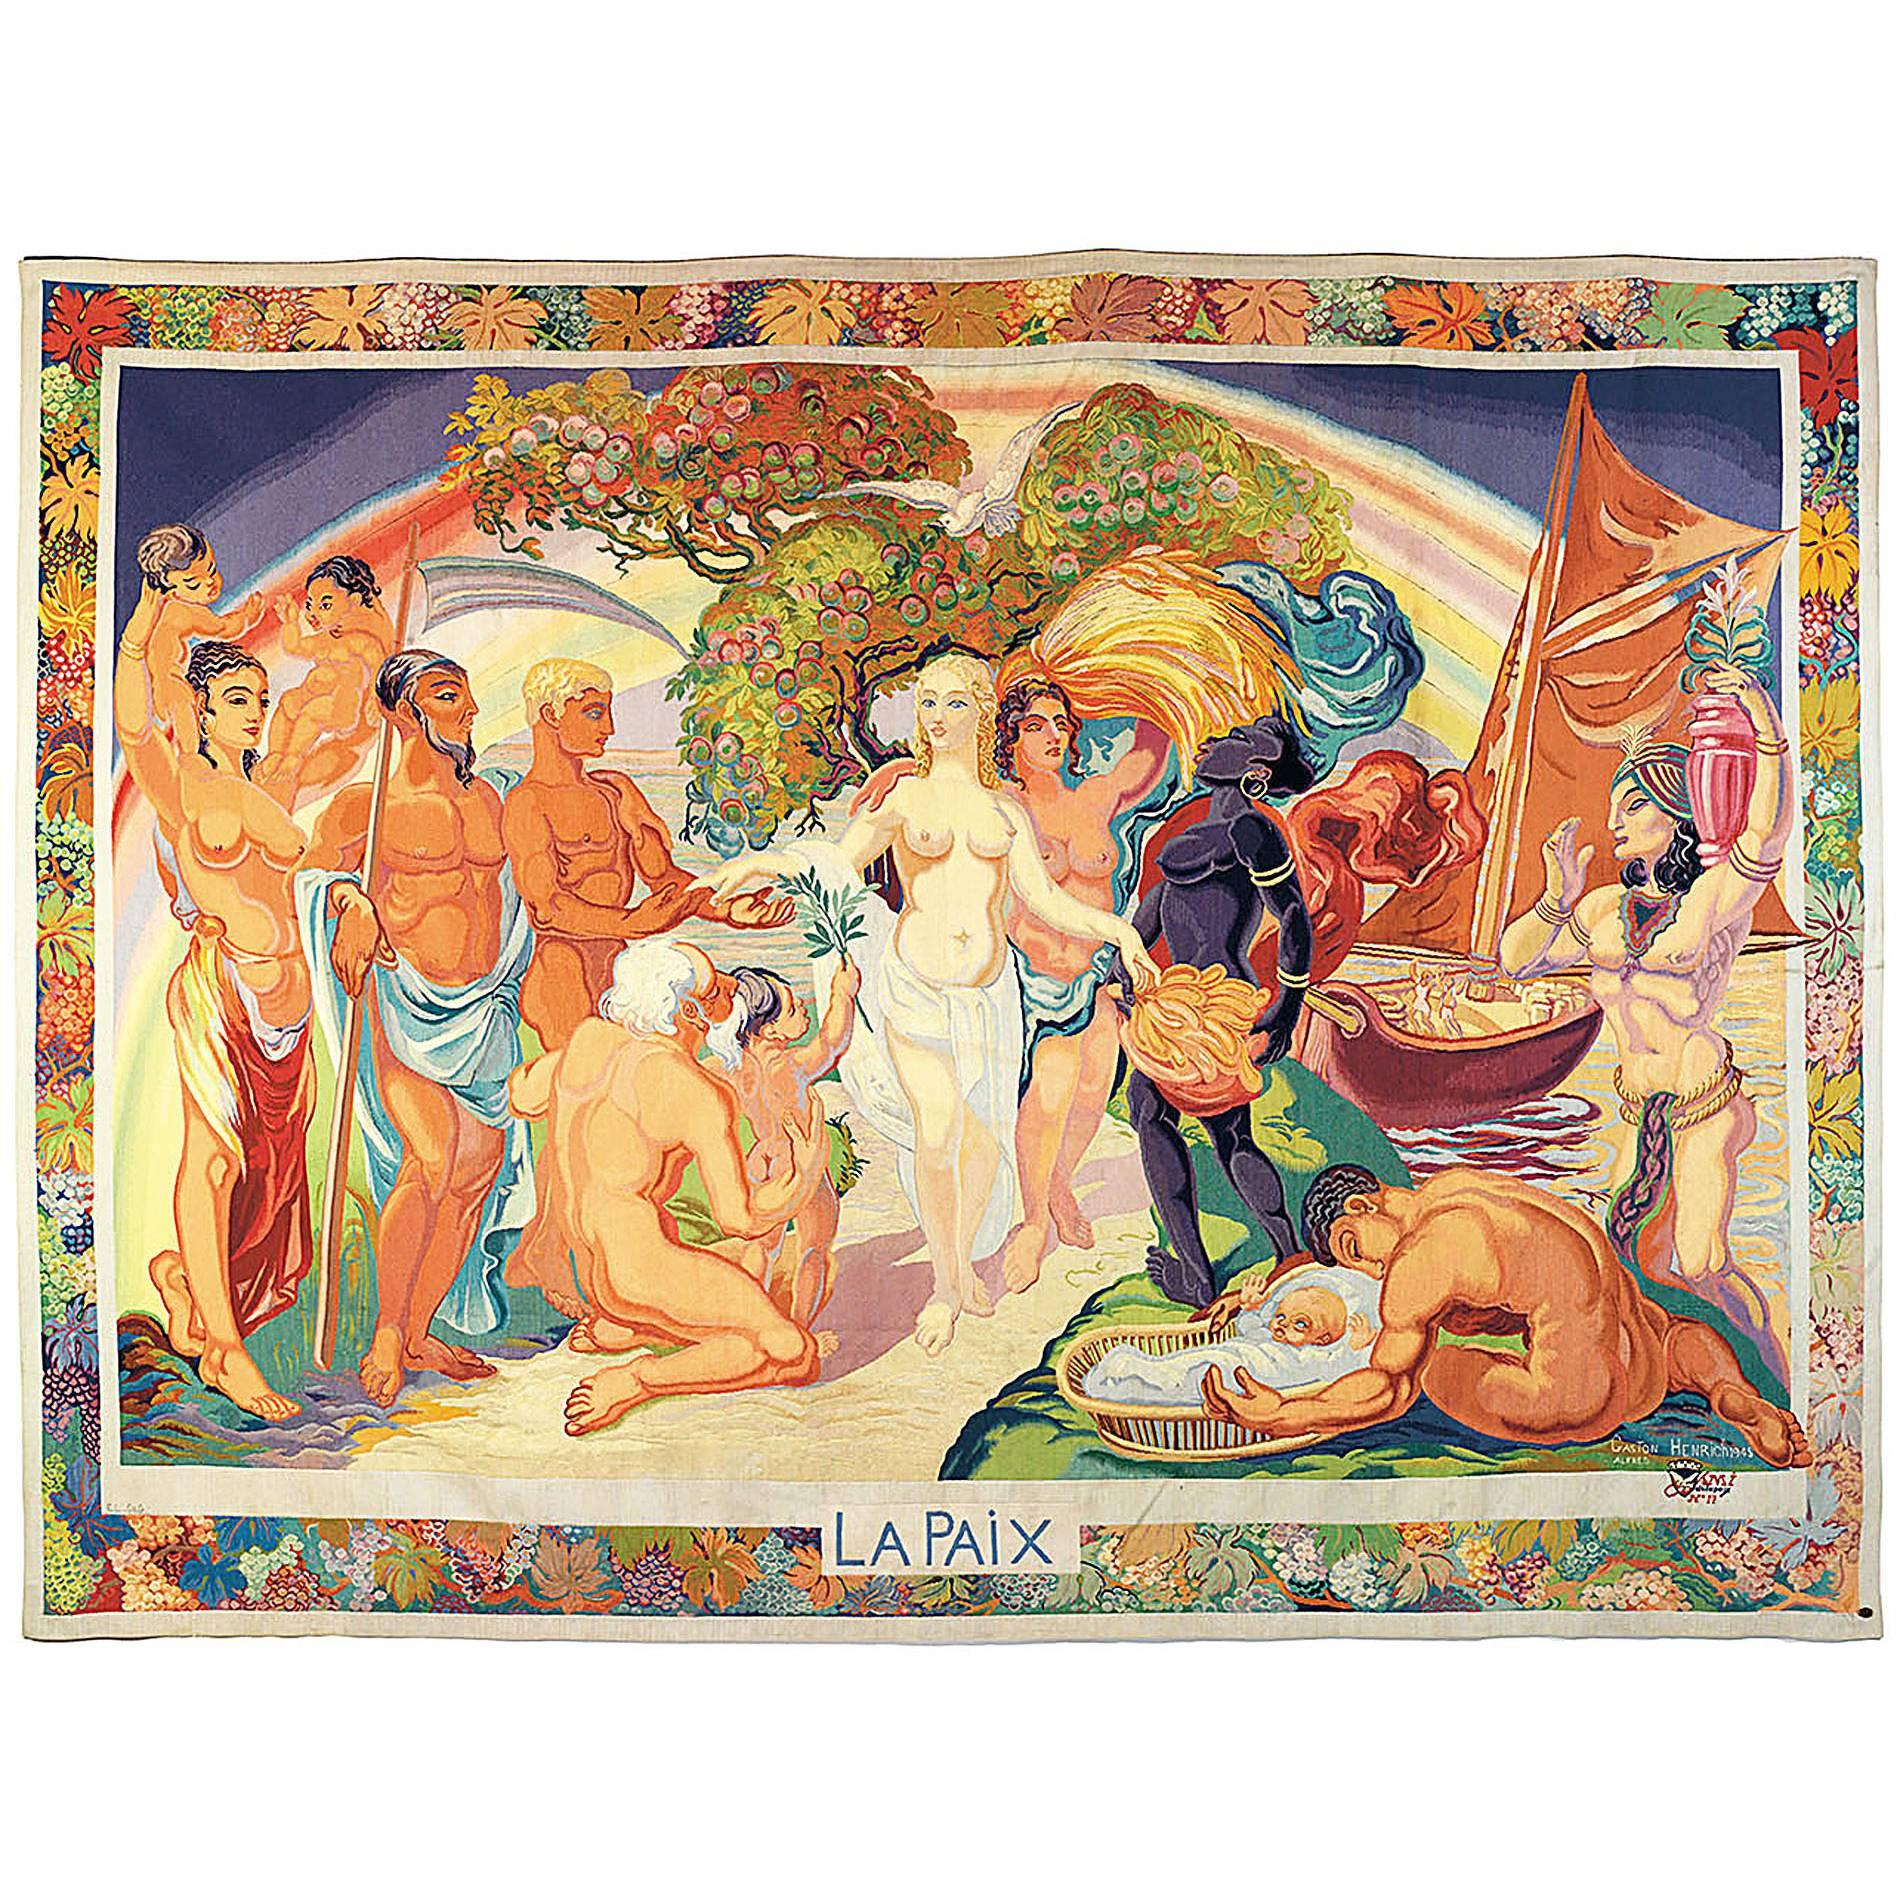 "Peace, " Monumental Art Deco Tapestry w/ Goddess of Abundance and Nudes, 1945